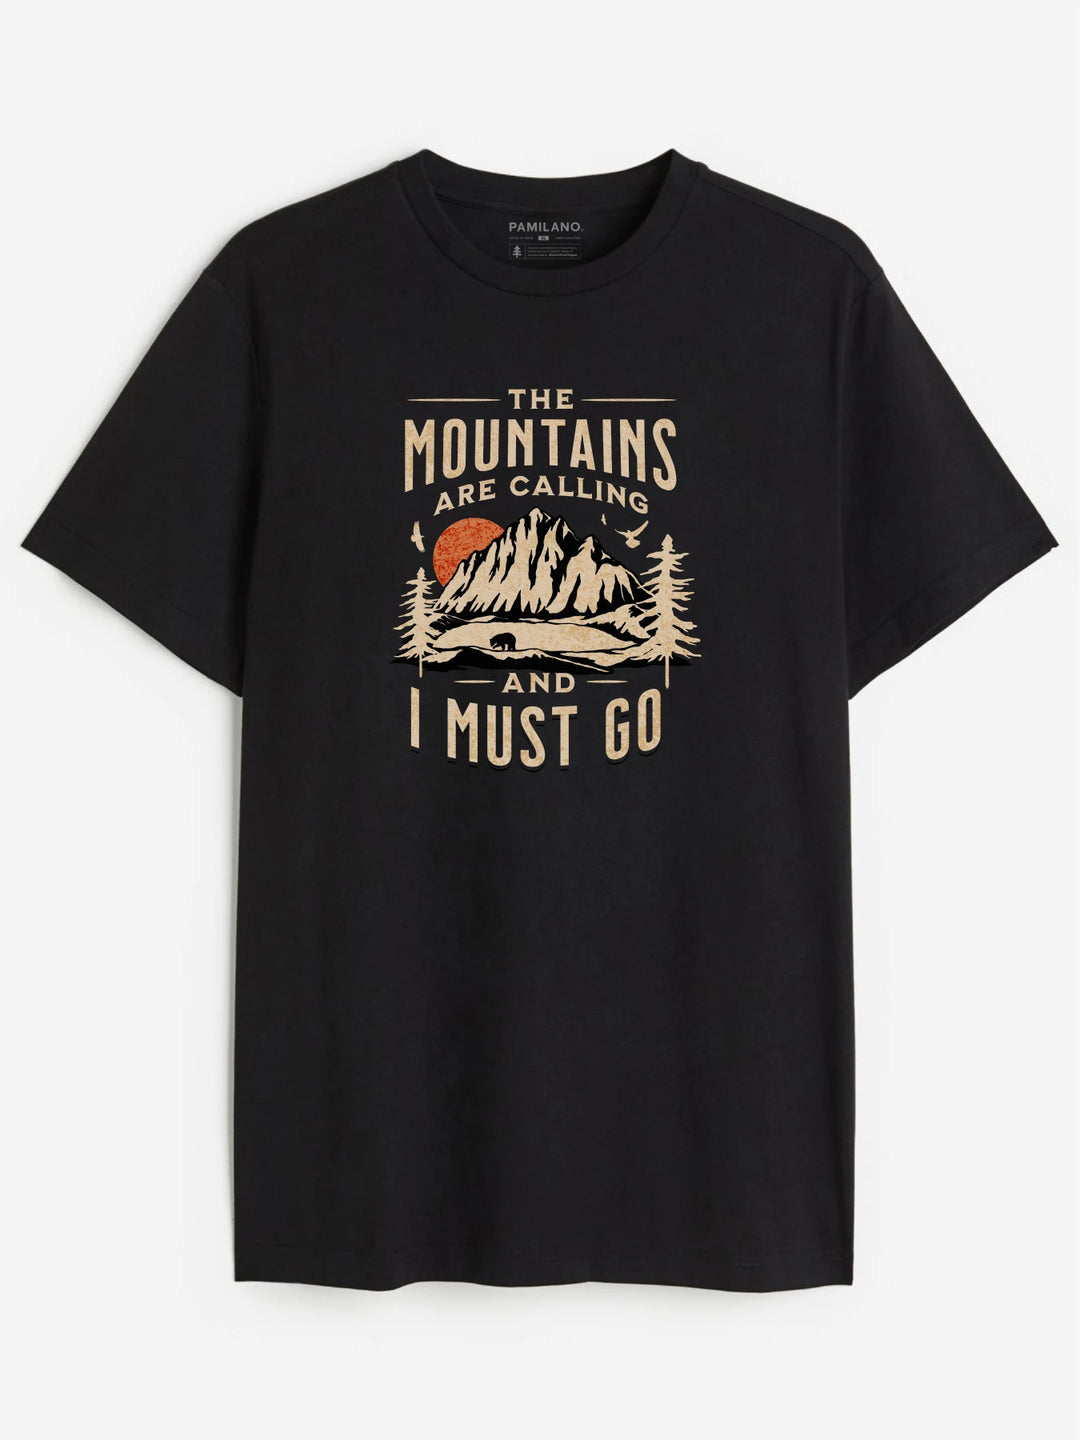 The Mountains Are Calling - Unisex T-Shirt